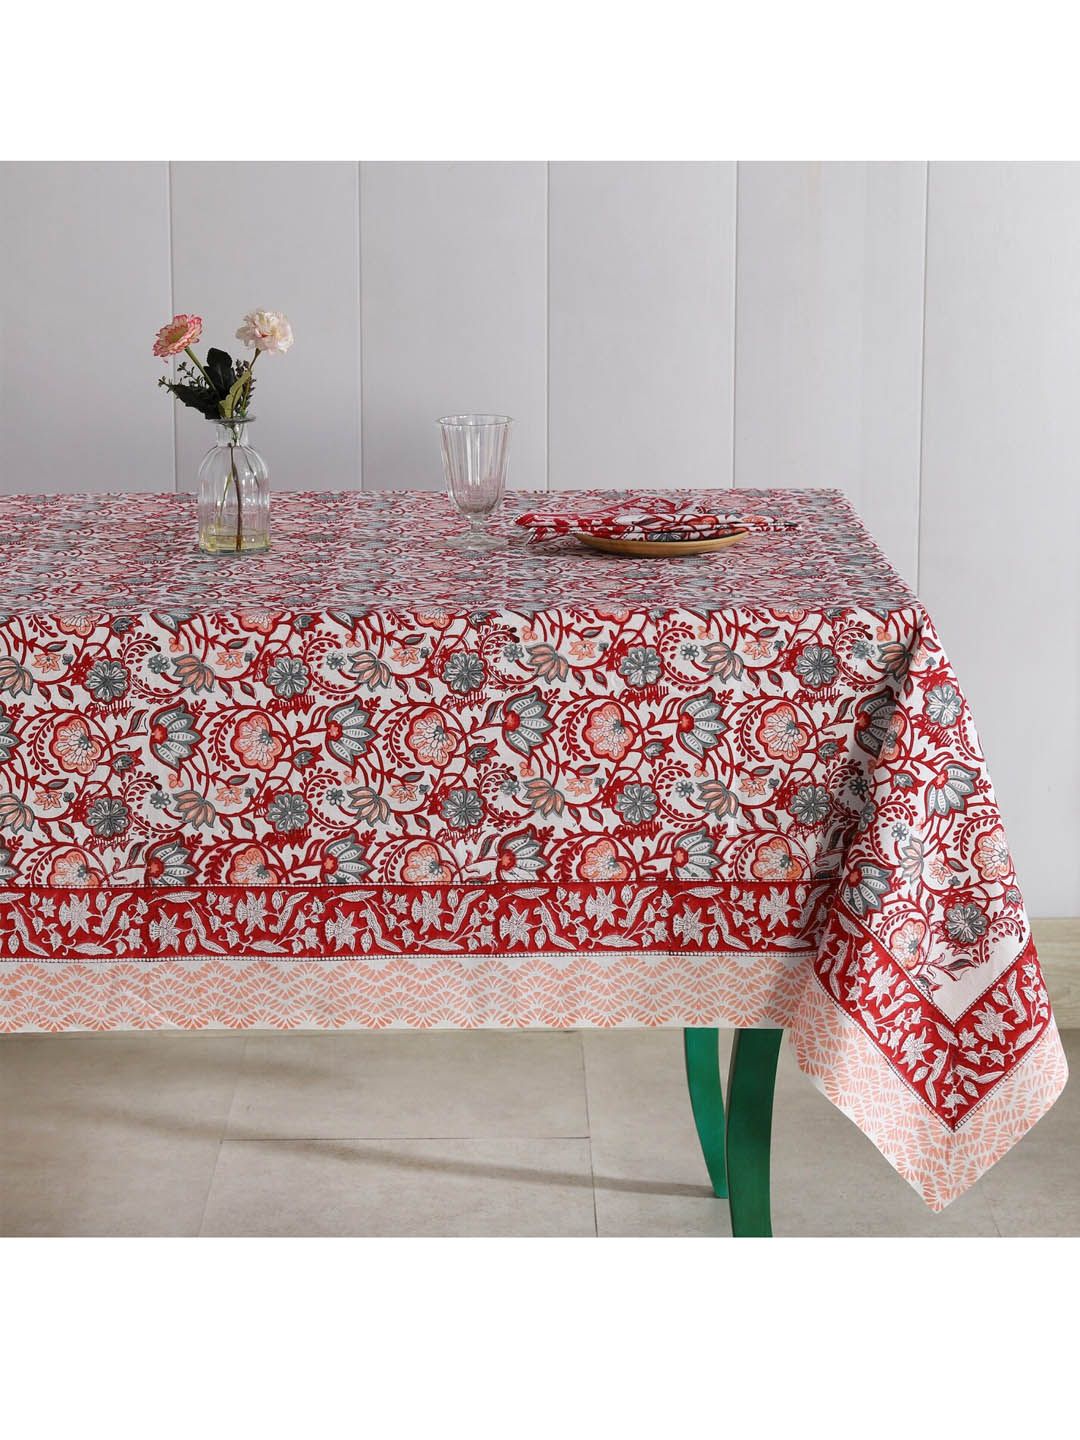 White & Red 6 Seater Lotus Floral Hand Block Printed Cotton Table Cover & 6 Piece Napkins Price in India